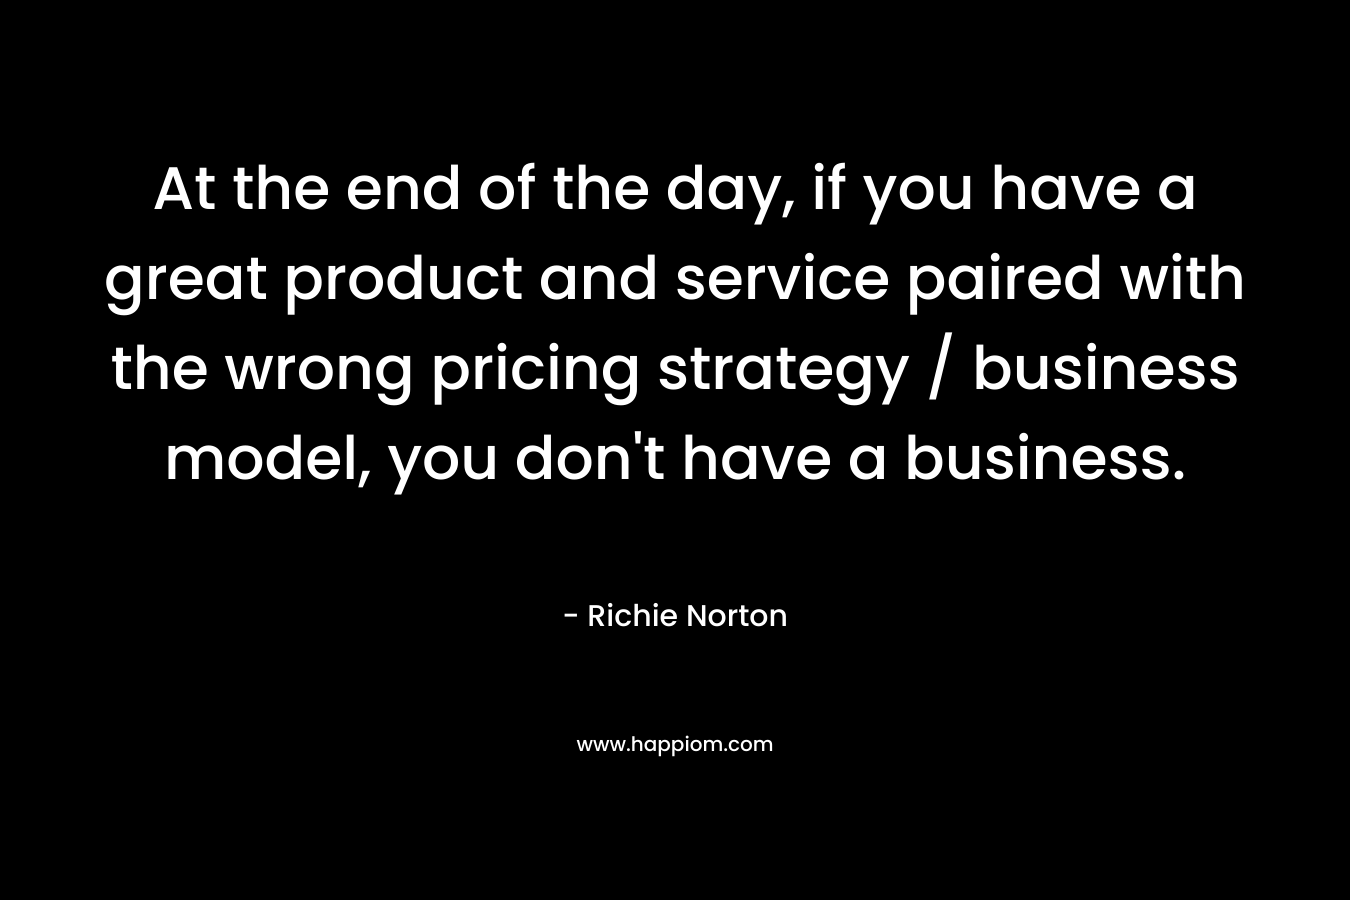 At the end of the day, if you have a great product and service paired with the wrong pricing strategy / business model, you don't have a business.